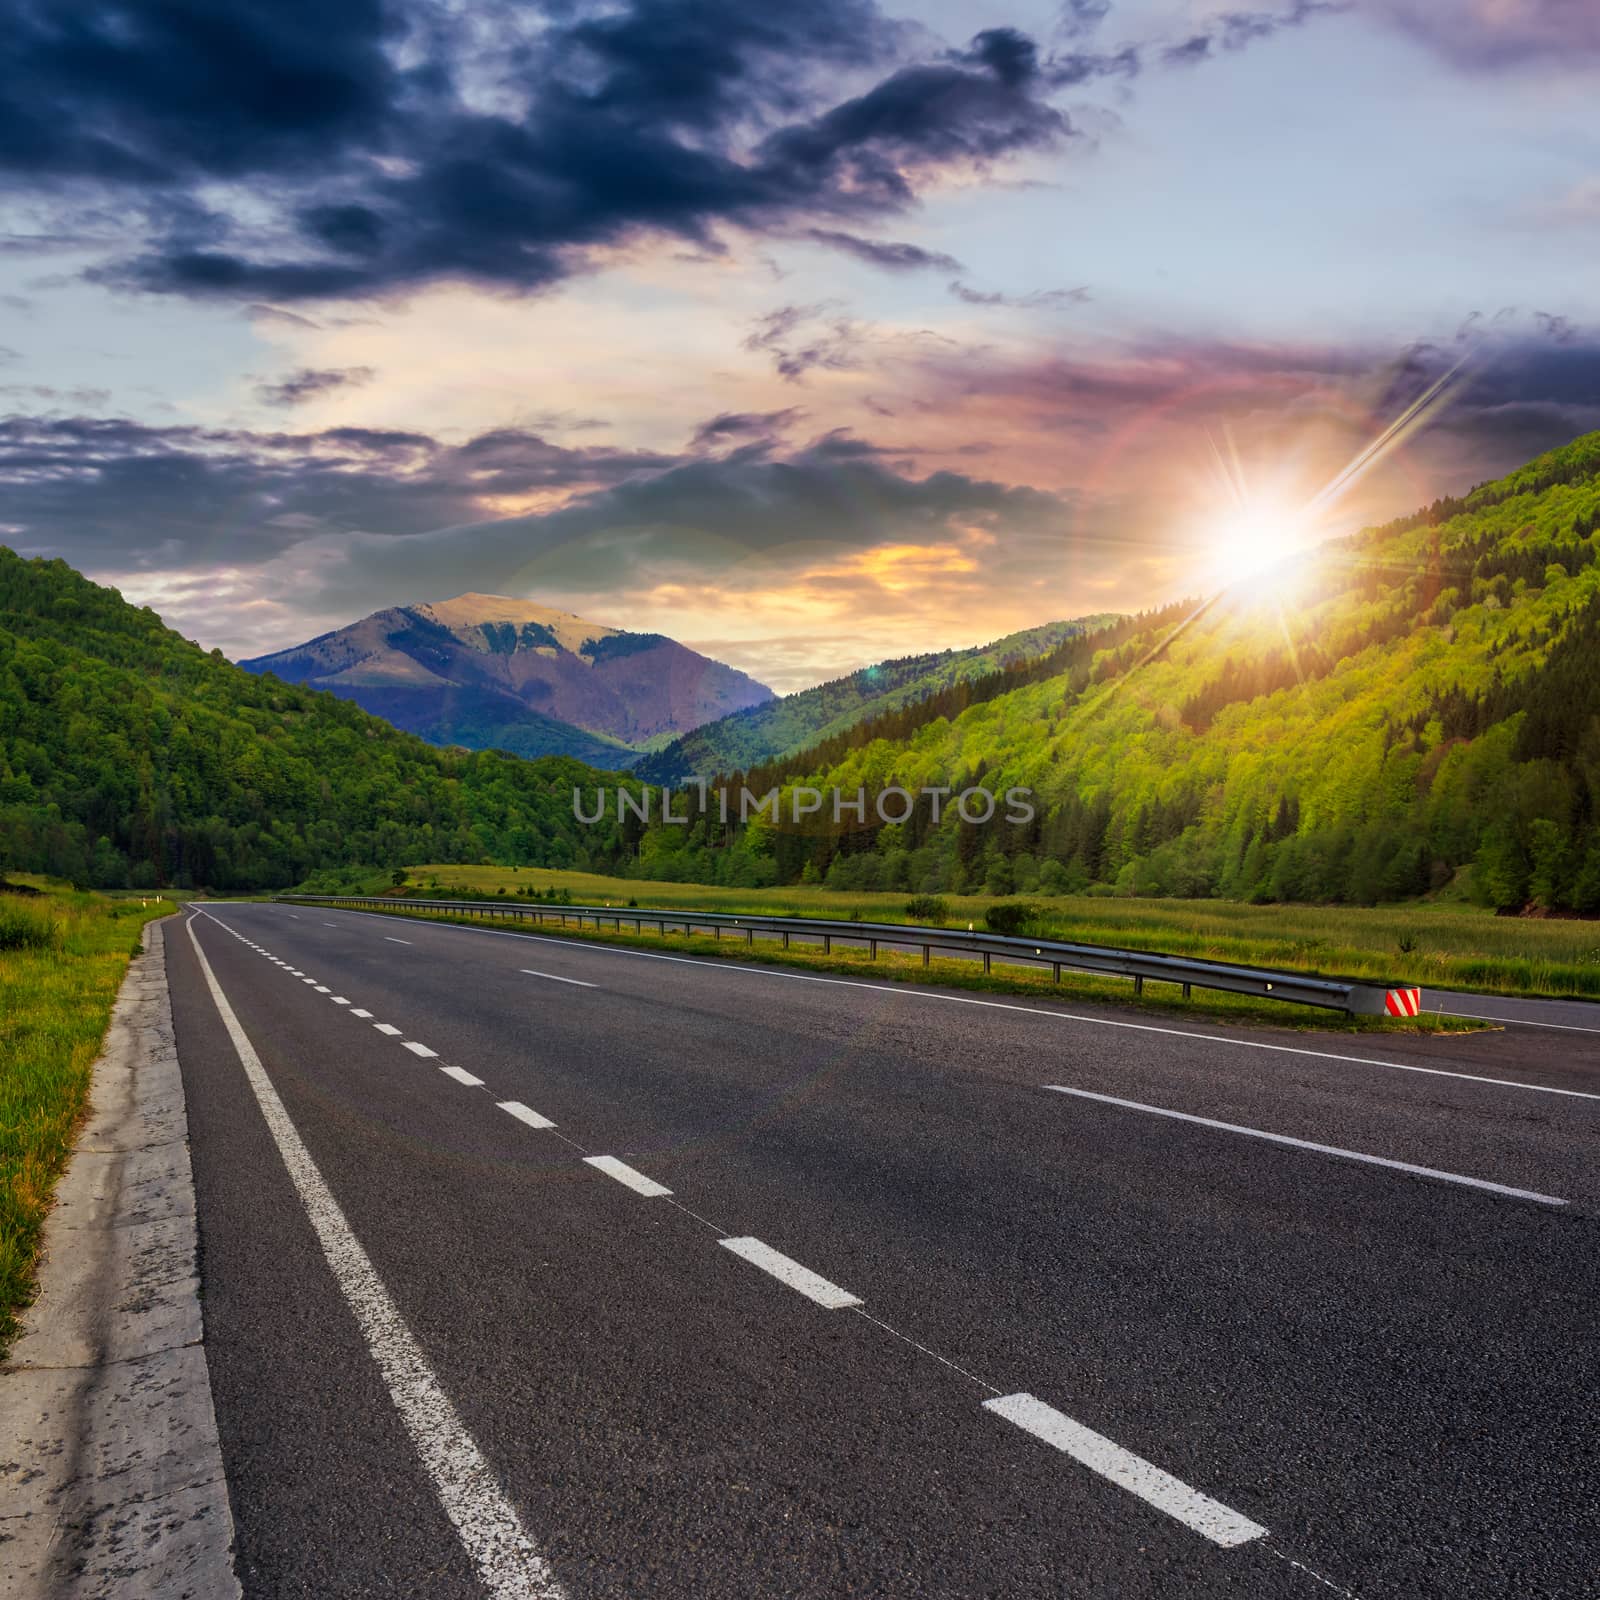 stright asphalt road in mountains passes through the green shaded forest at sunset